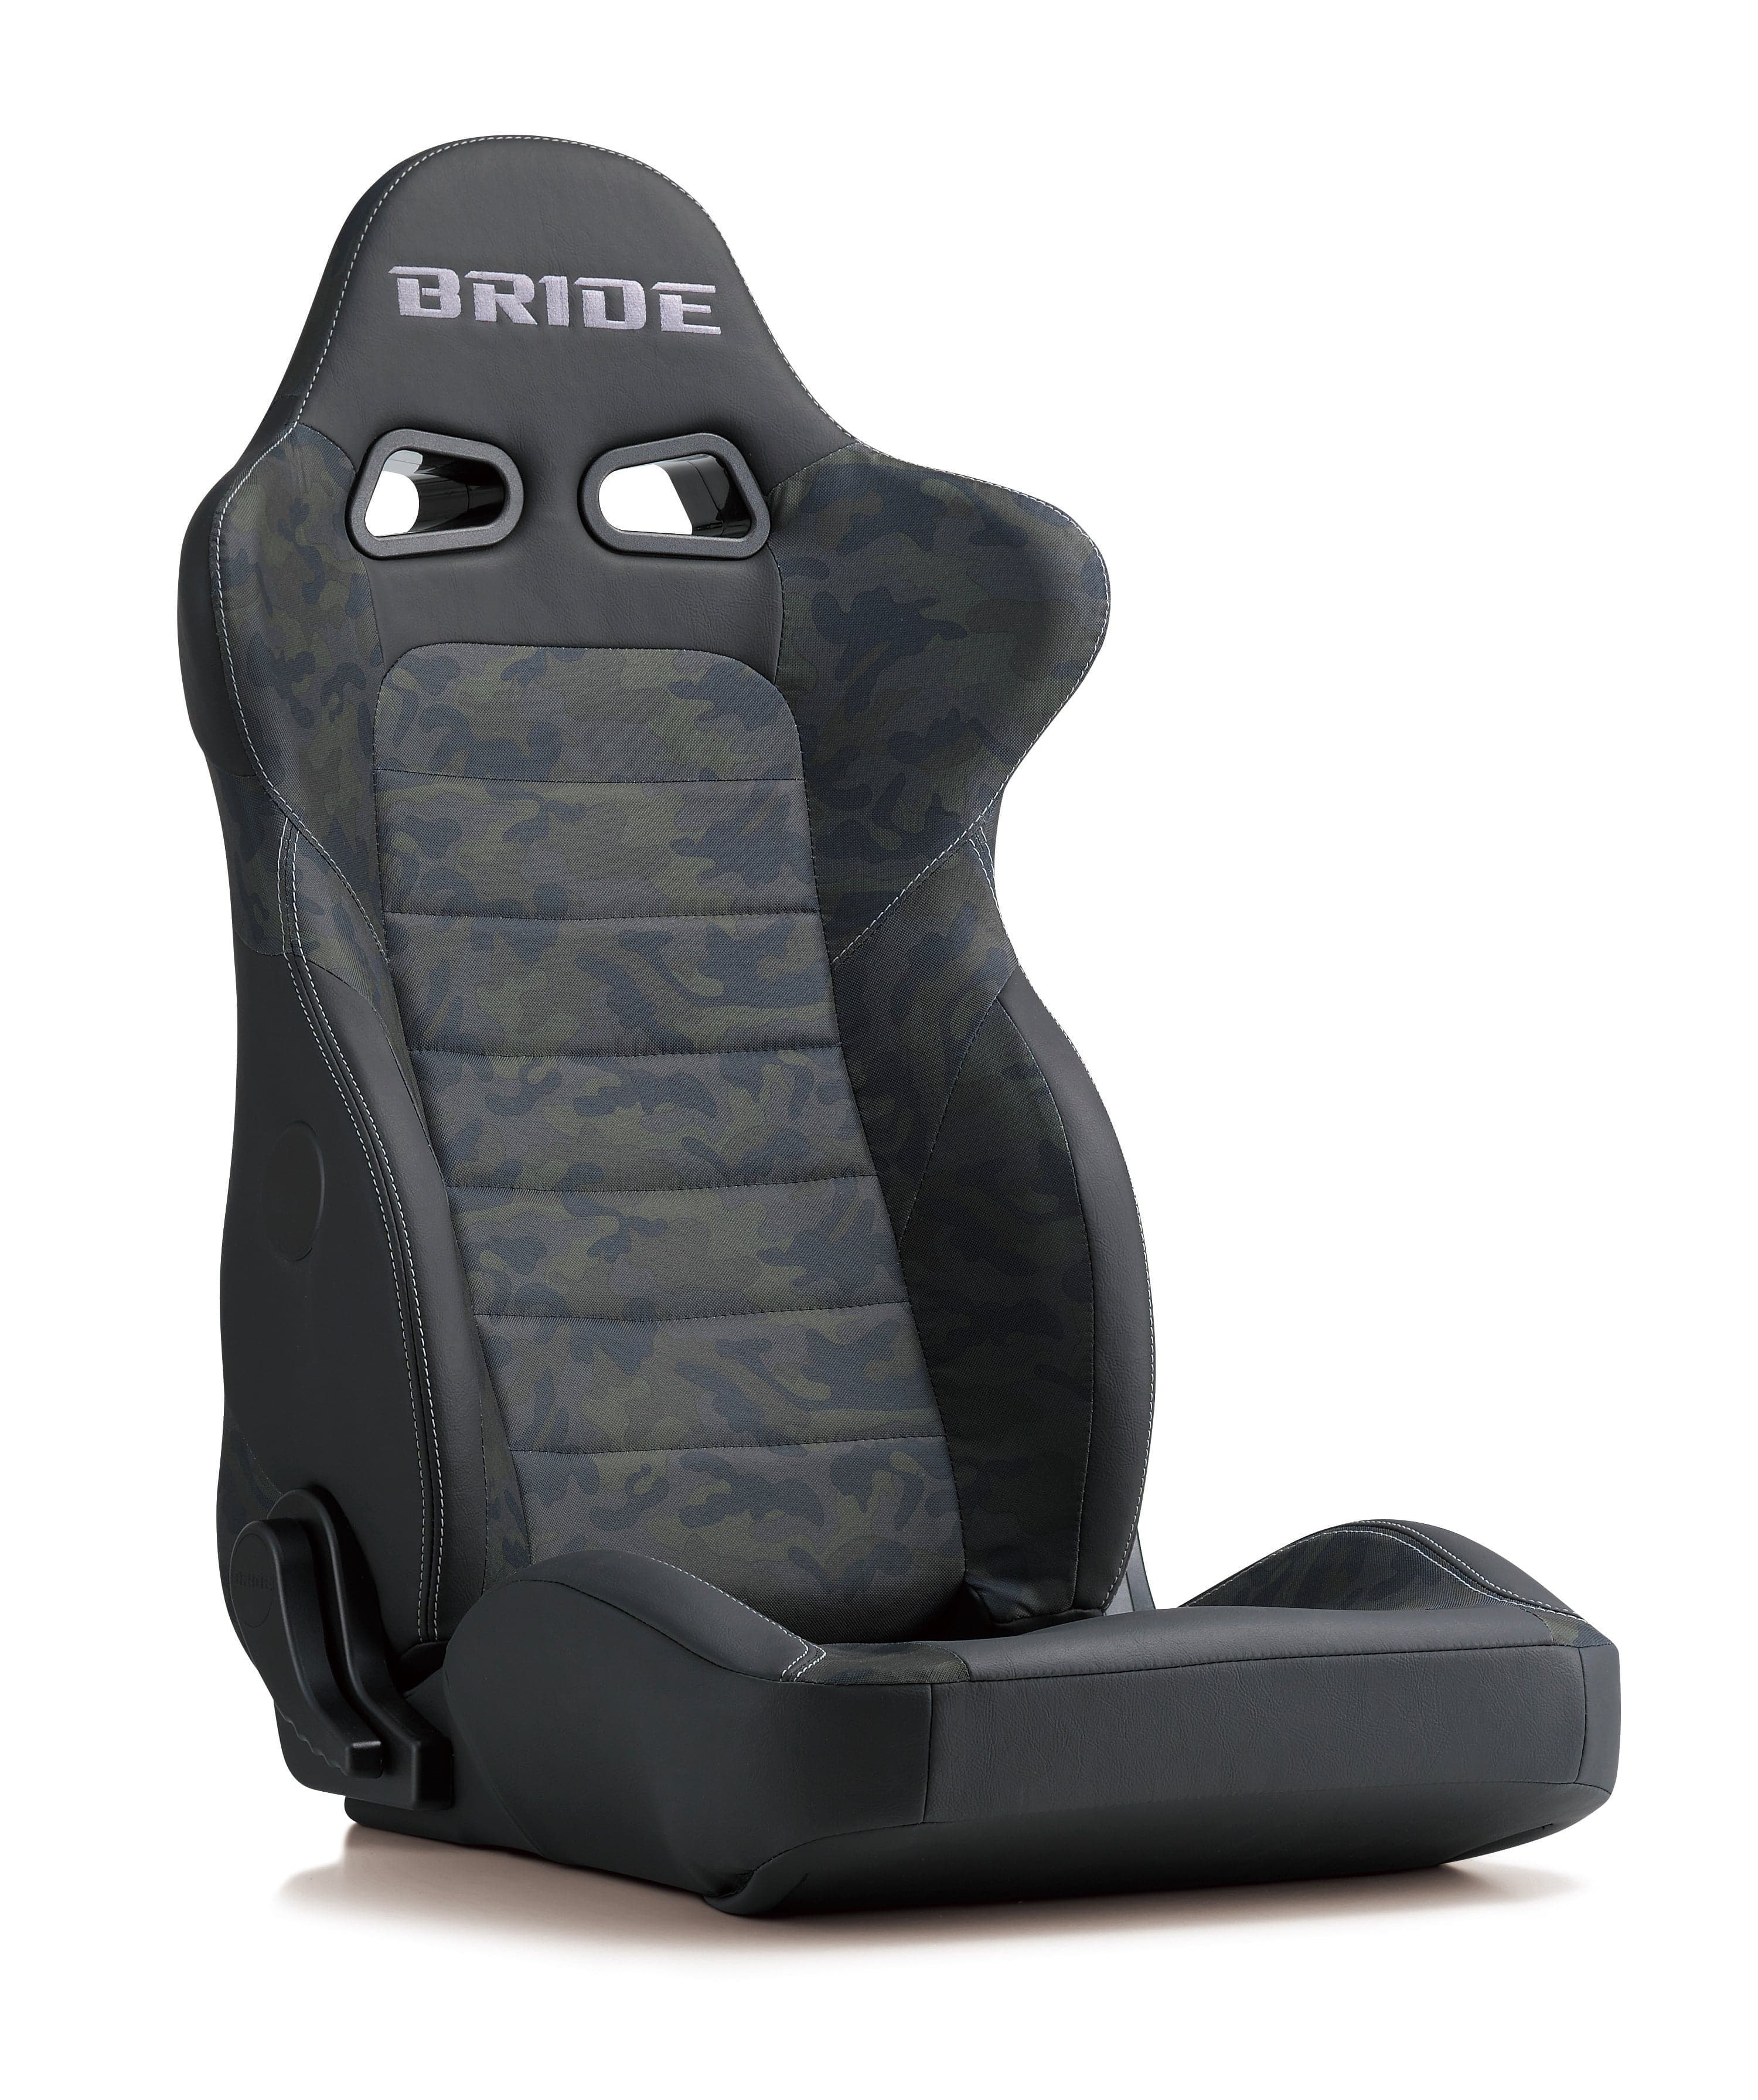 Bride EUROGHOST Green Camouflage Seat